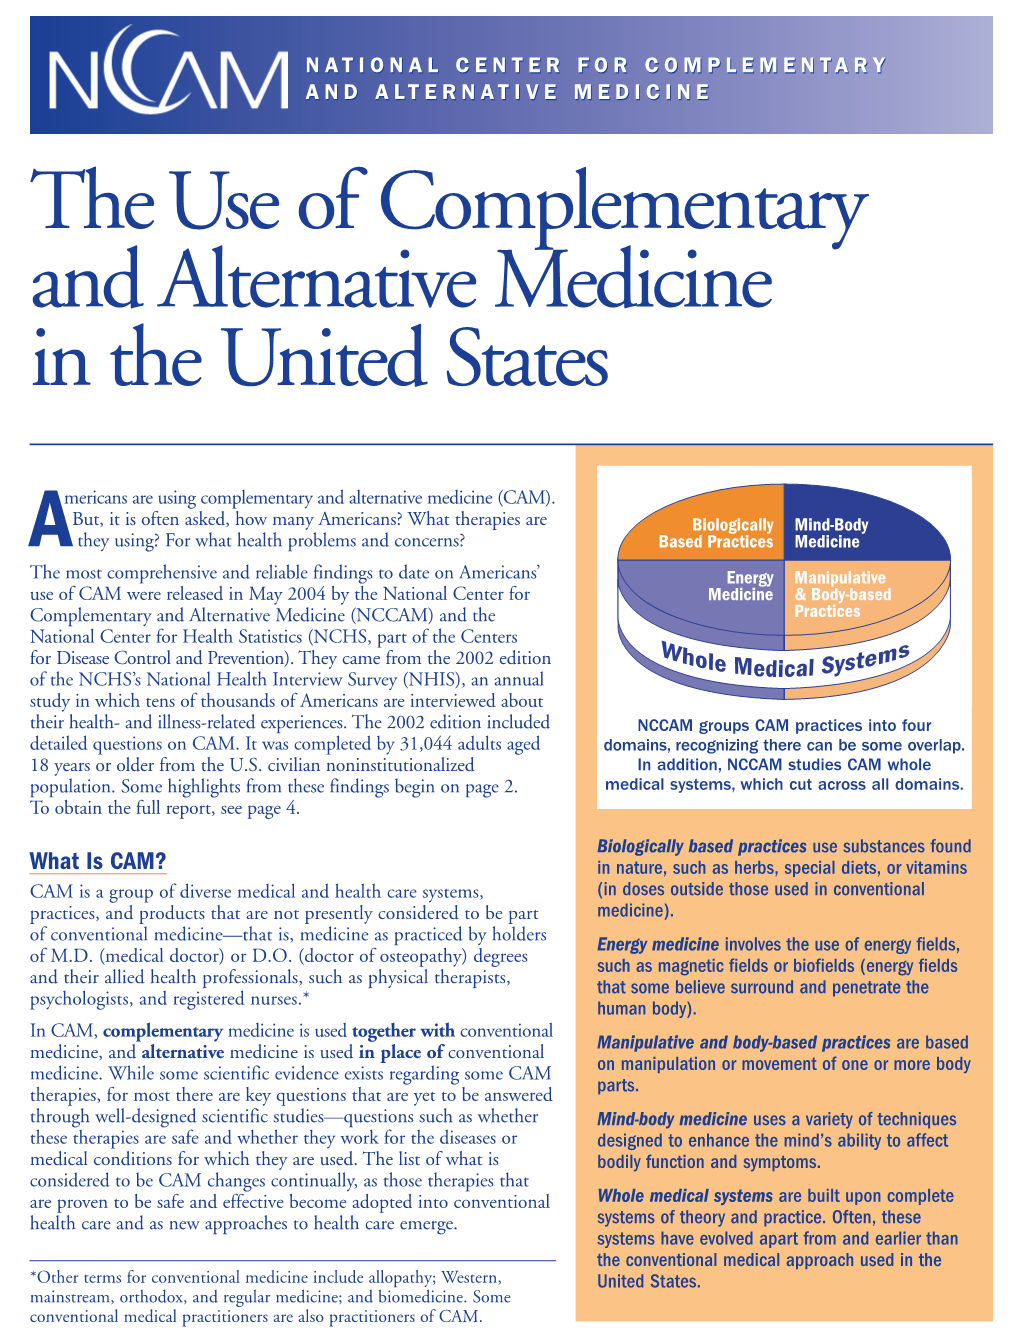 The Use of Complementary and Alternative Medicine in the United